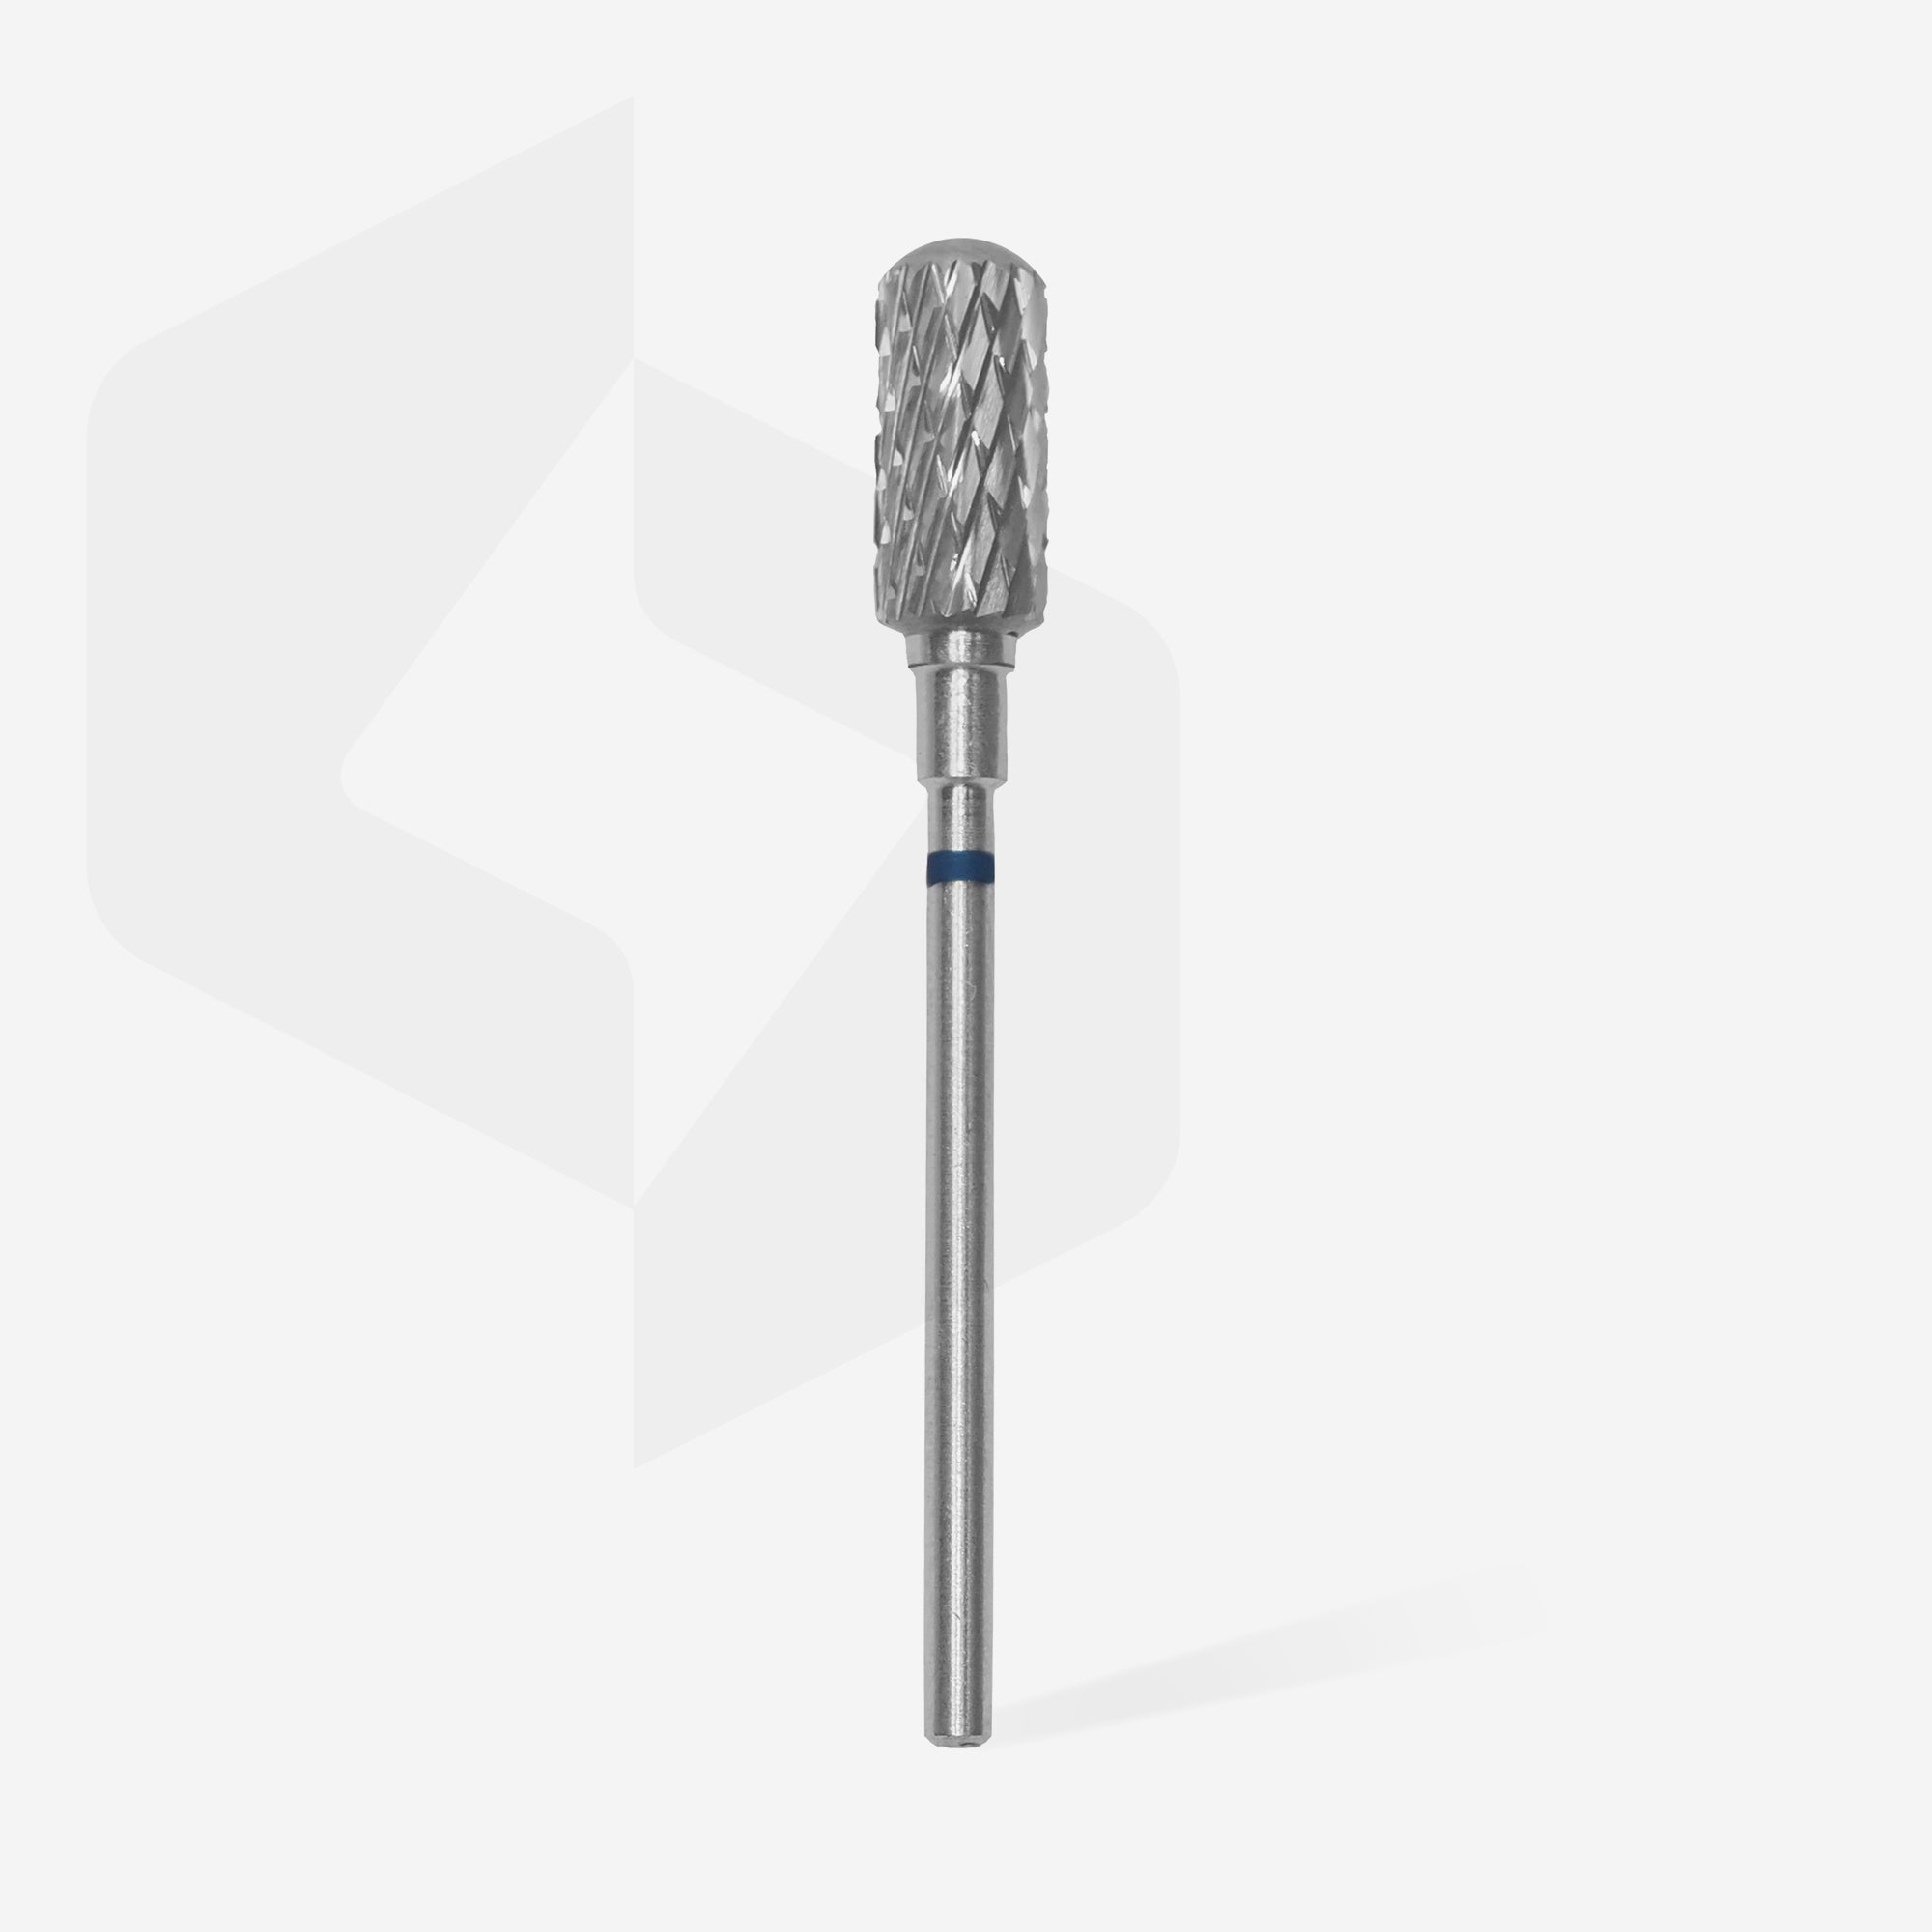 Carbide nail drill bit, safe rounded "cylinder", blue, head diameter 6 mm / working part 14 mm